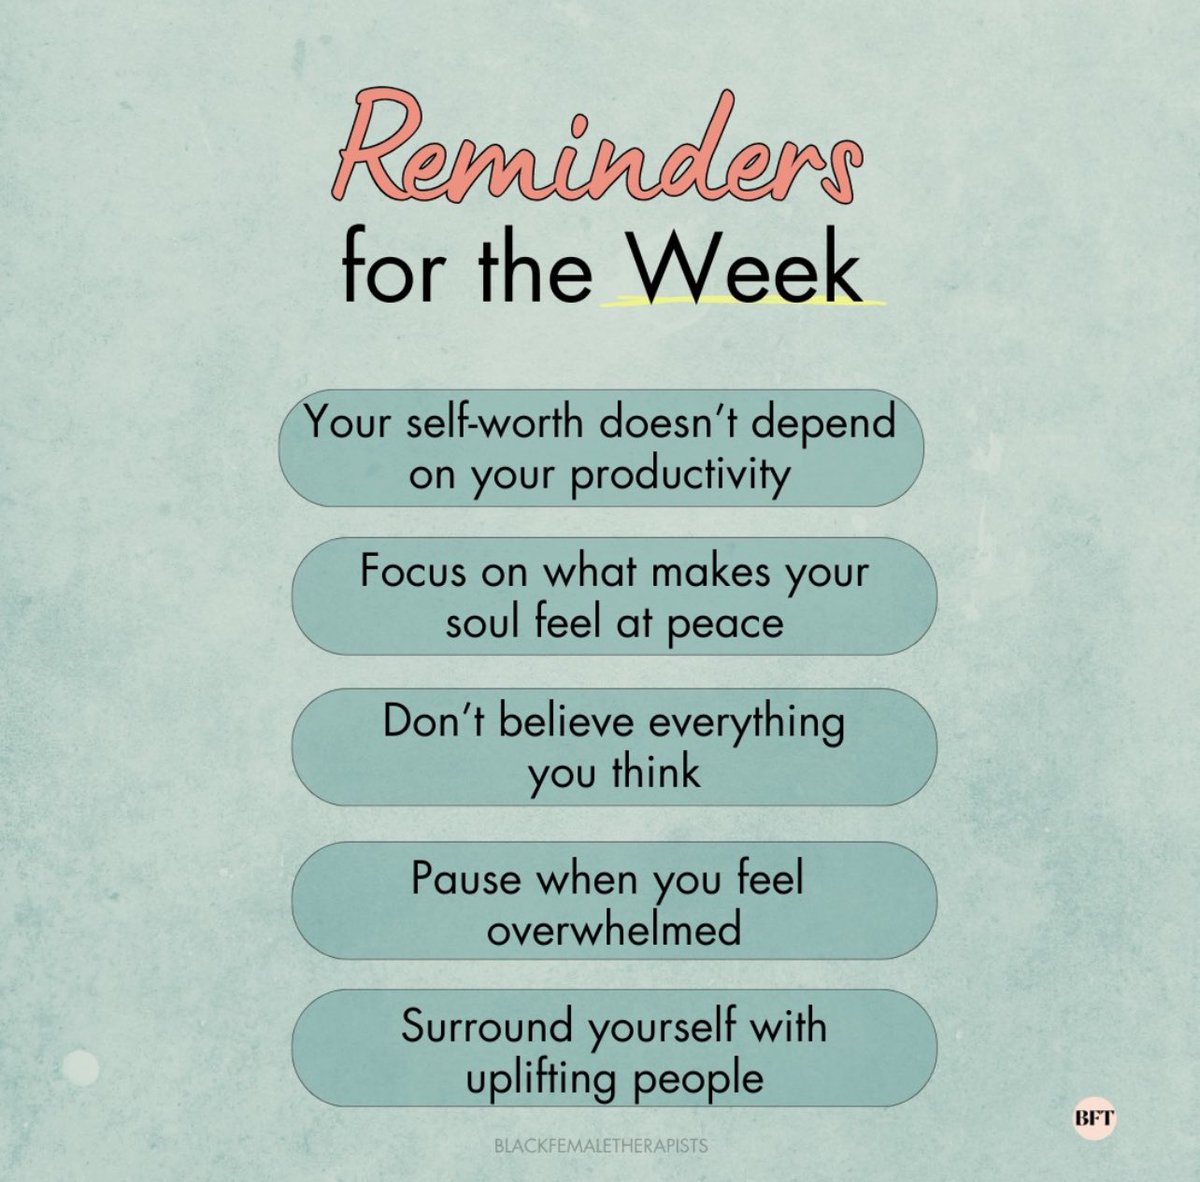 Reminders for the week! 💫 #pocce #counselors #counseloredincolor #colorincounselored #counseloreducators #cheerstoagreatweek @bftherapists